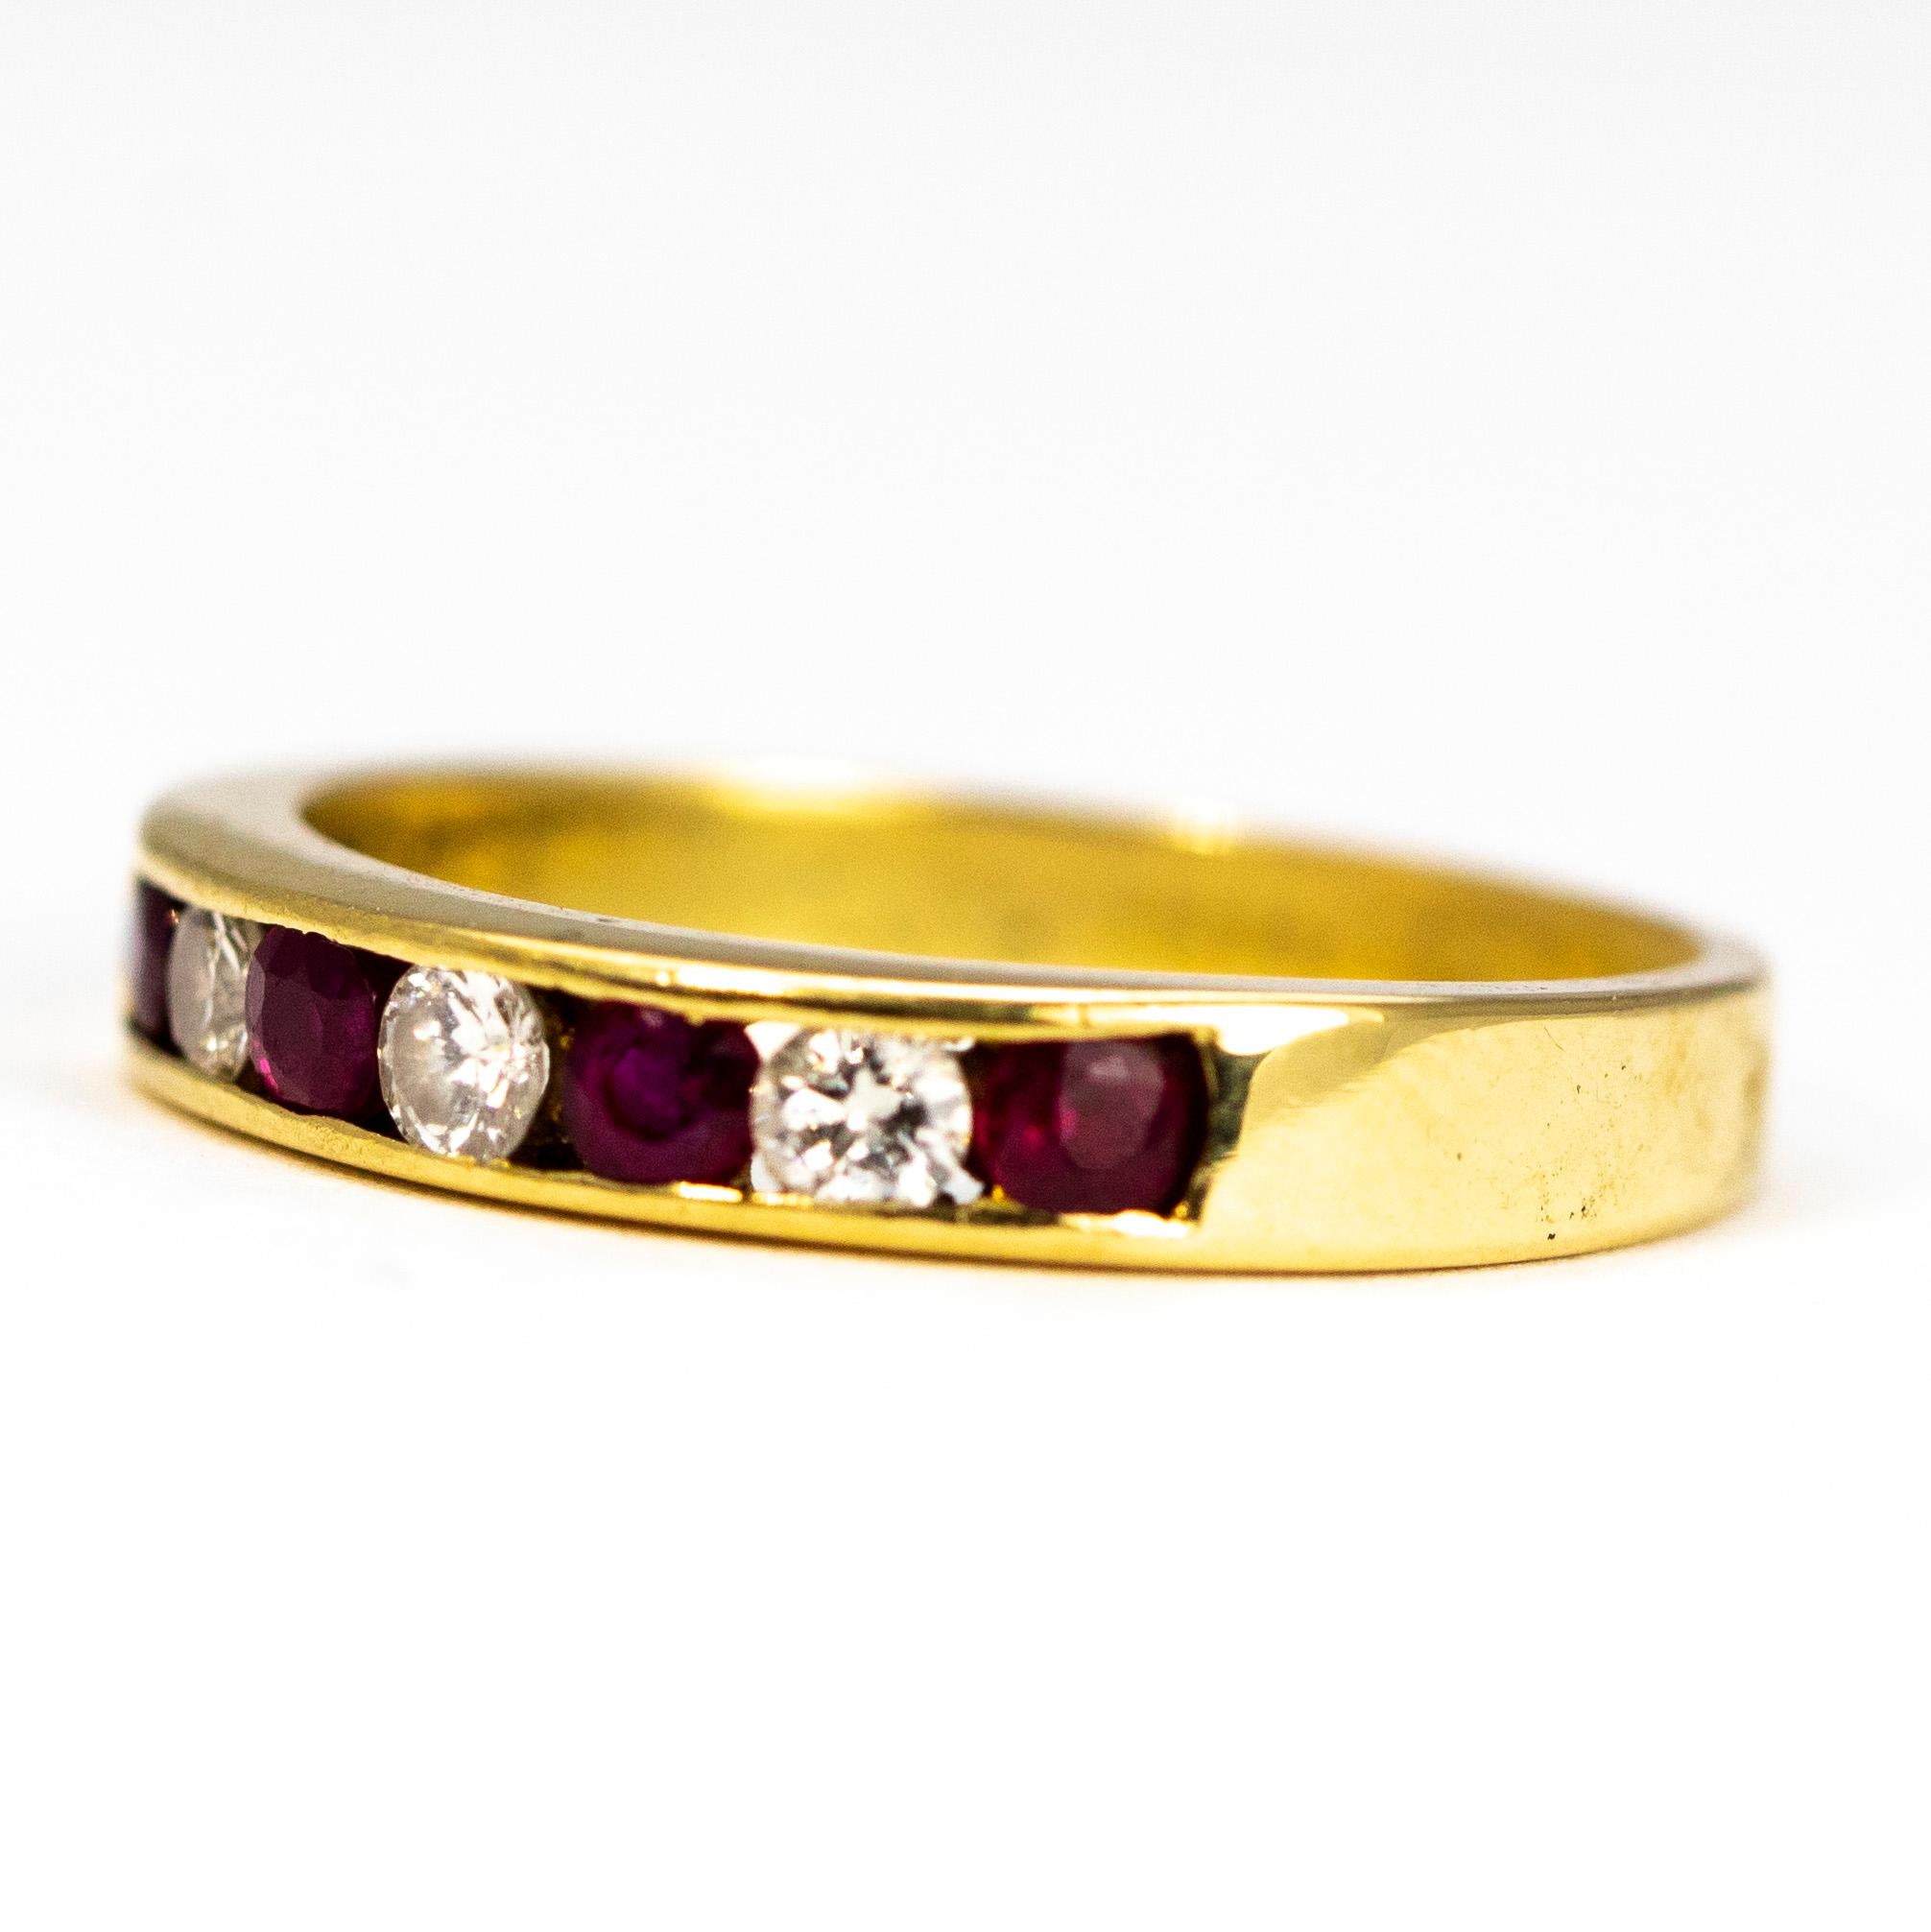 This wonderful half eternity holds round stones that are set in straight settings so you can see the whole edges of the stones. The rubies and diamonds measure 7pts each and there are four rubies and three diamonds.

Ring Size: O or 7 1/4
Band